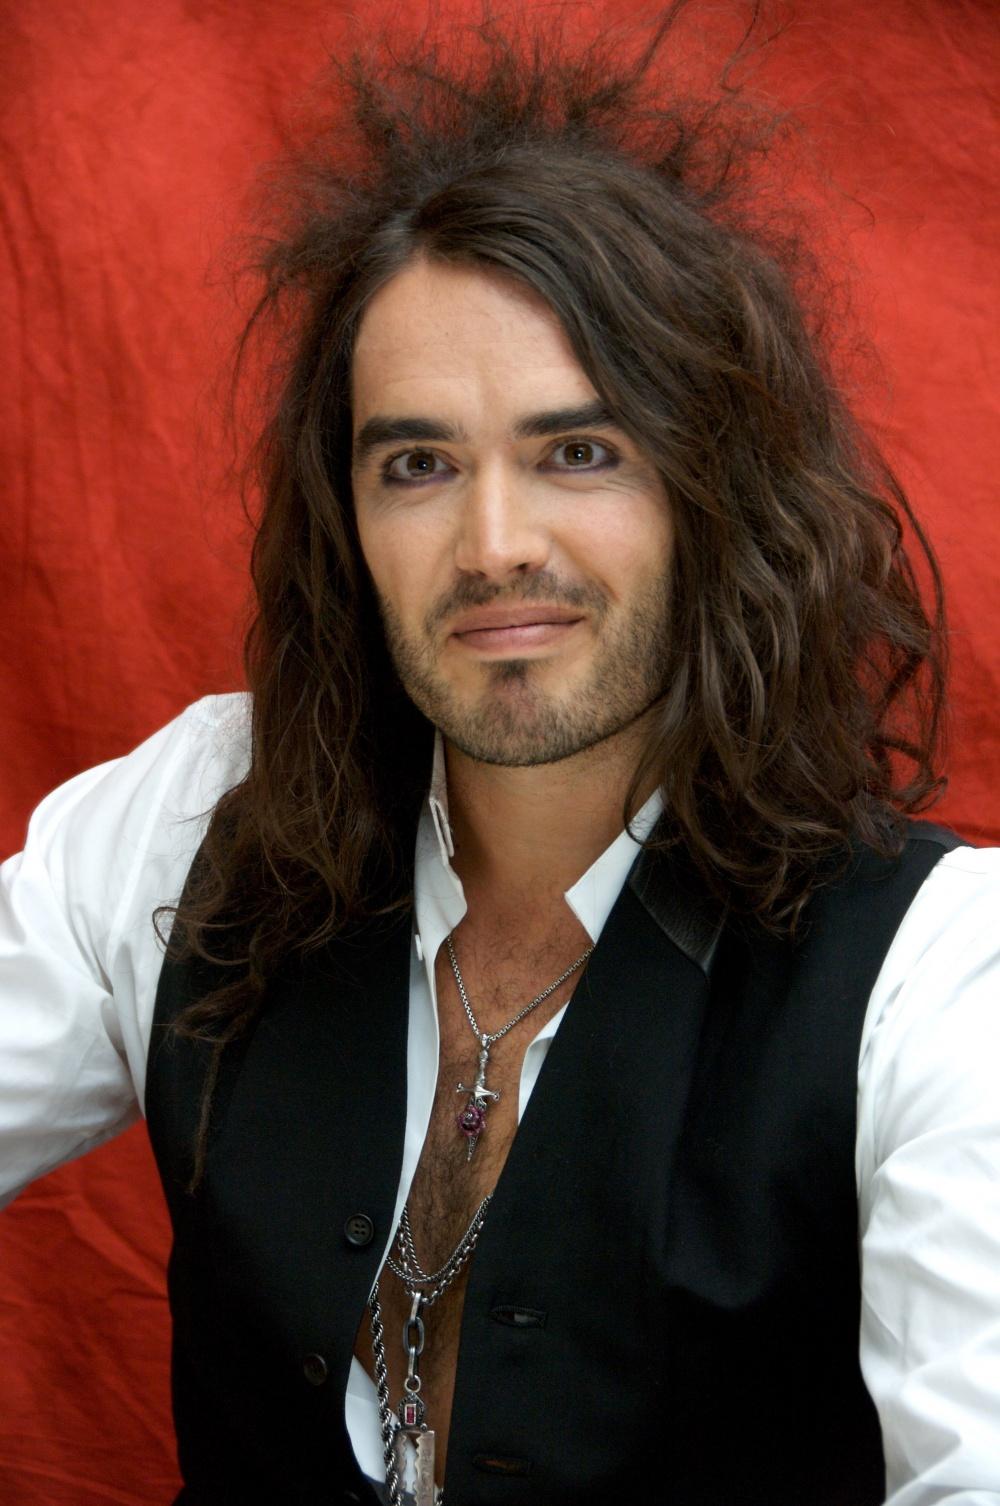 Photo №6430 Russell Brand.